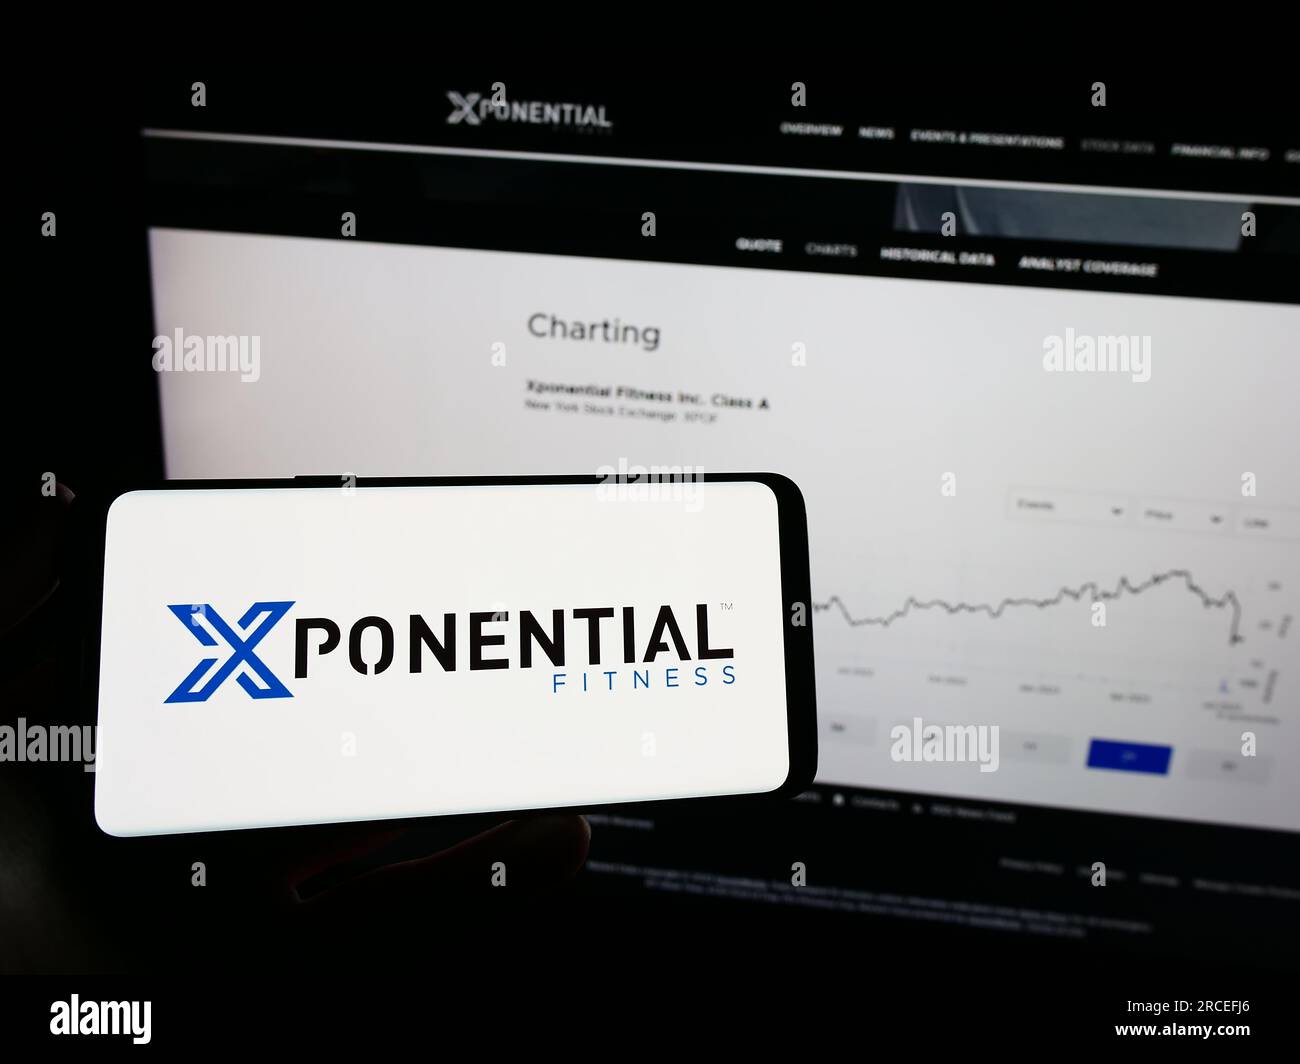 Person holding mobile phone with logo of US franchise company Xponential Fitness Inc. on screen in front of web page. Focus on phone display. Stock Photo